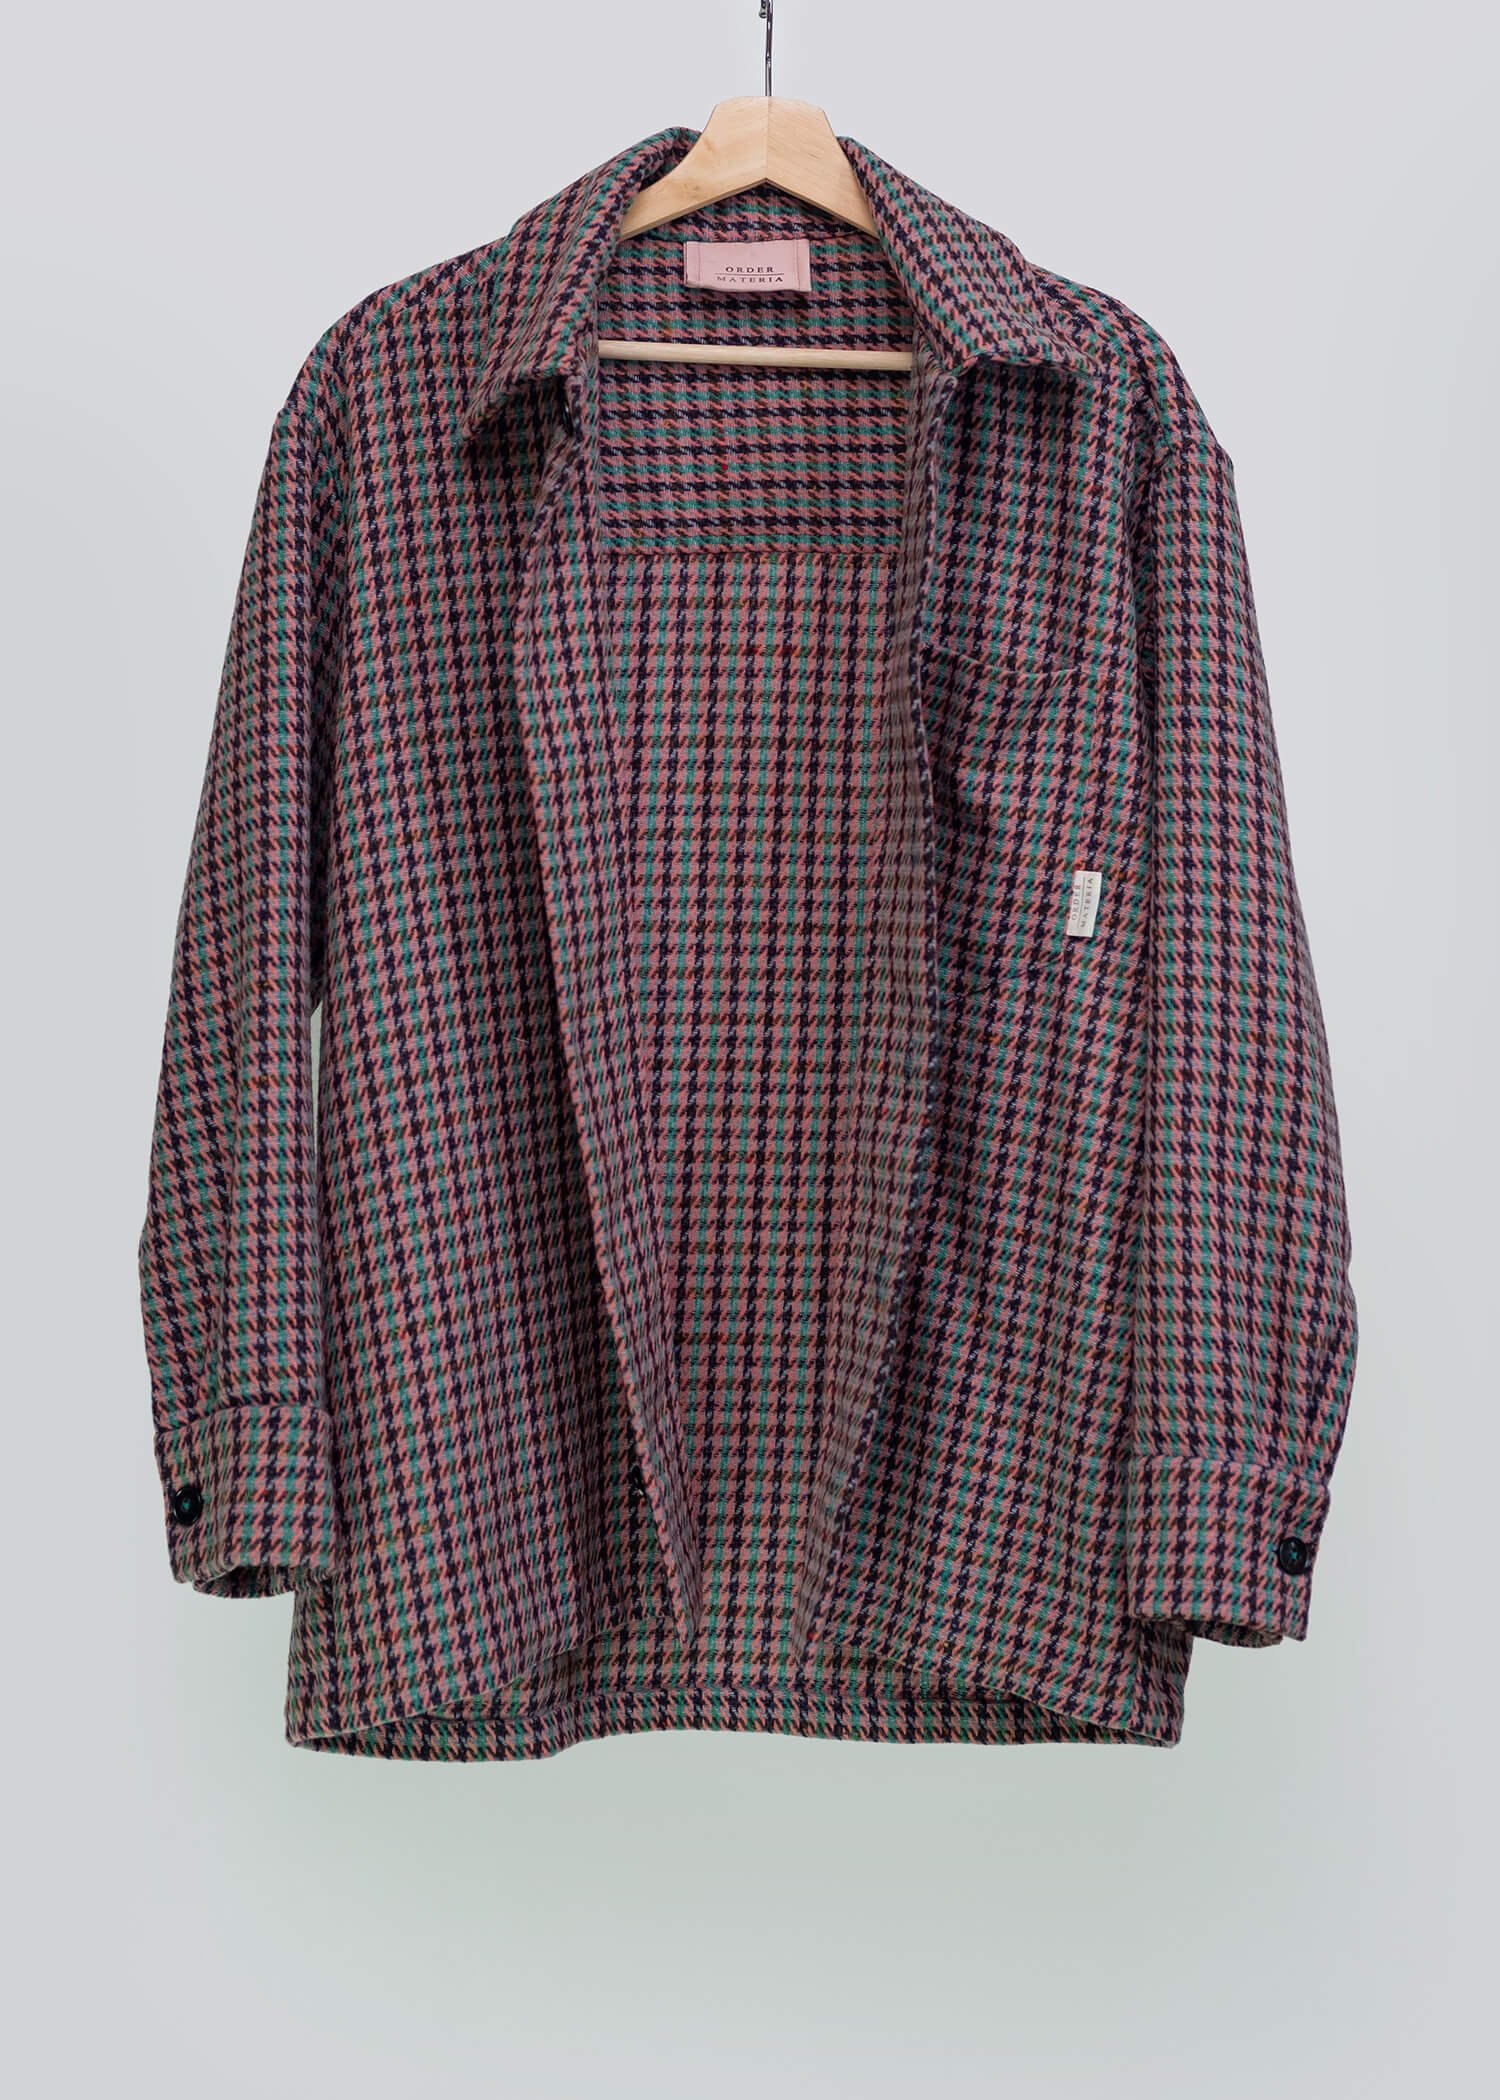 Men’s Chocolate and Oatmeal Check Over Shirt by Order Materia — Order ...